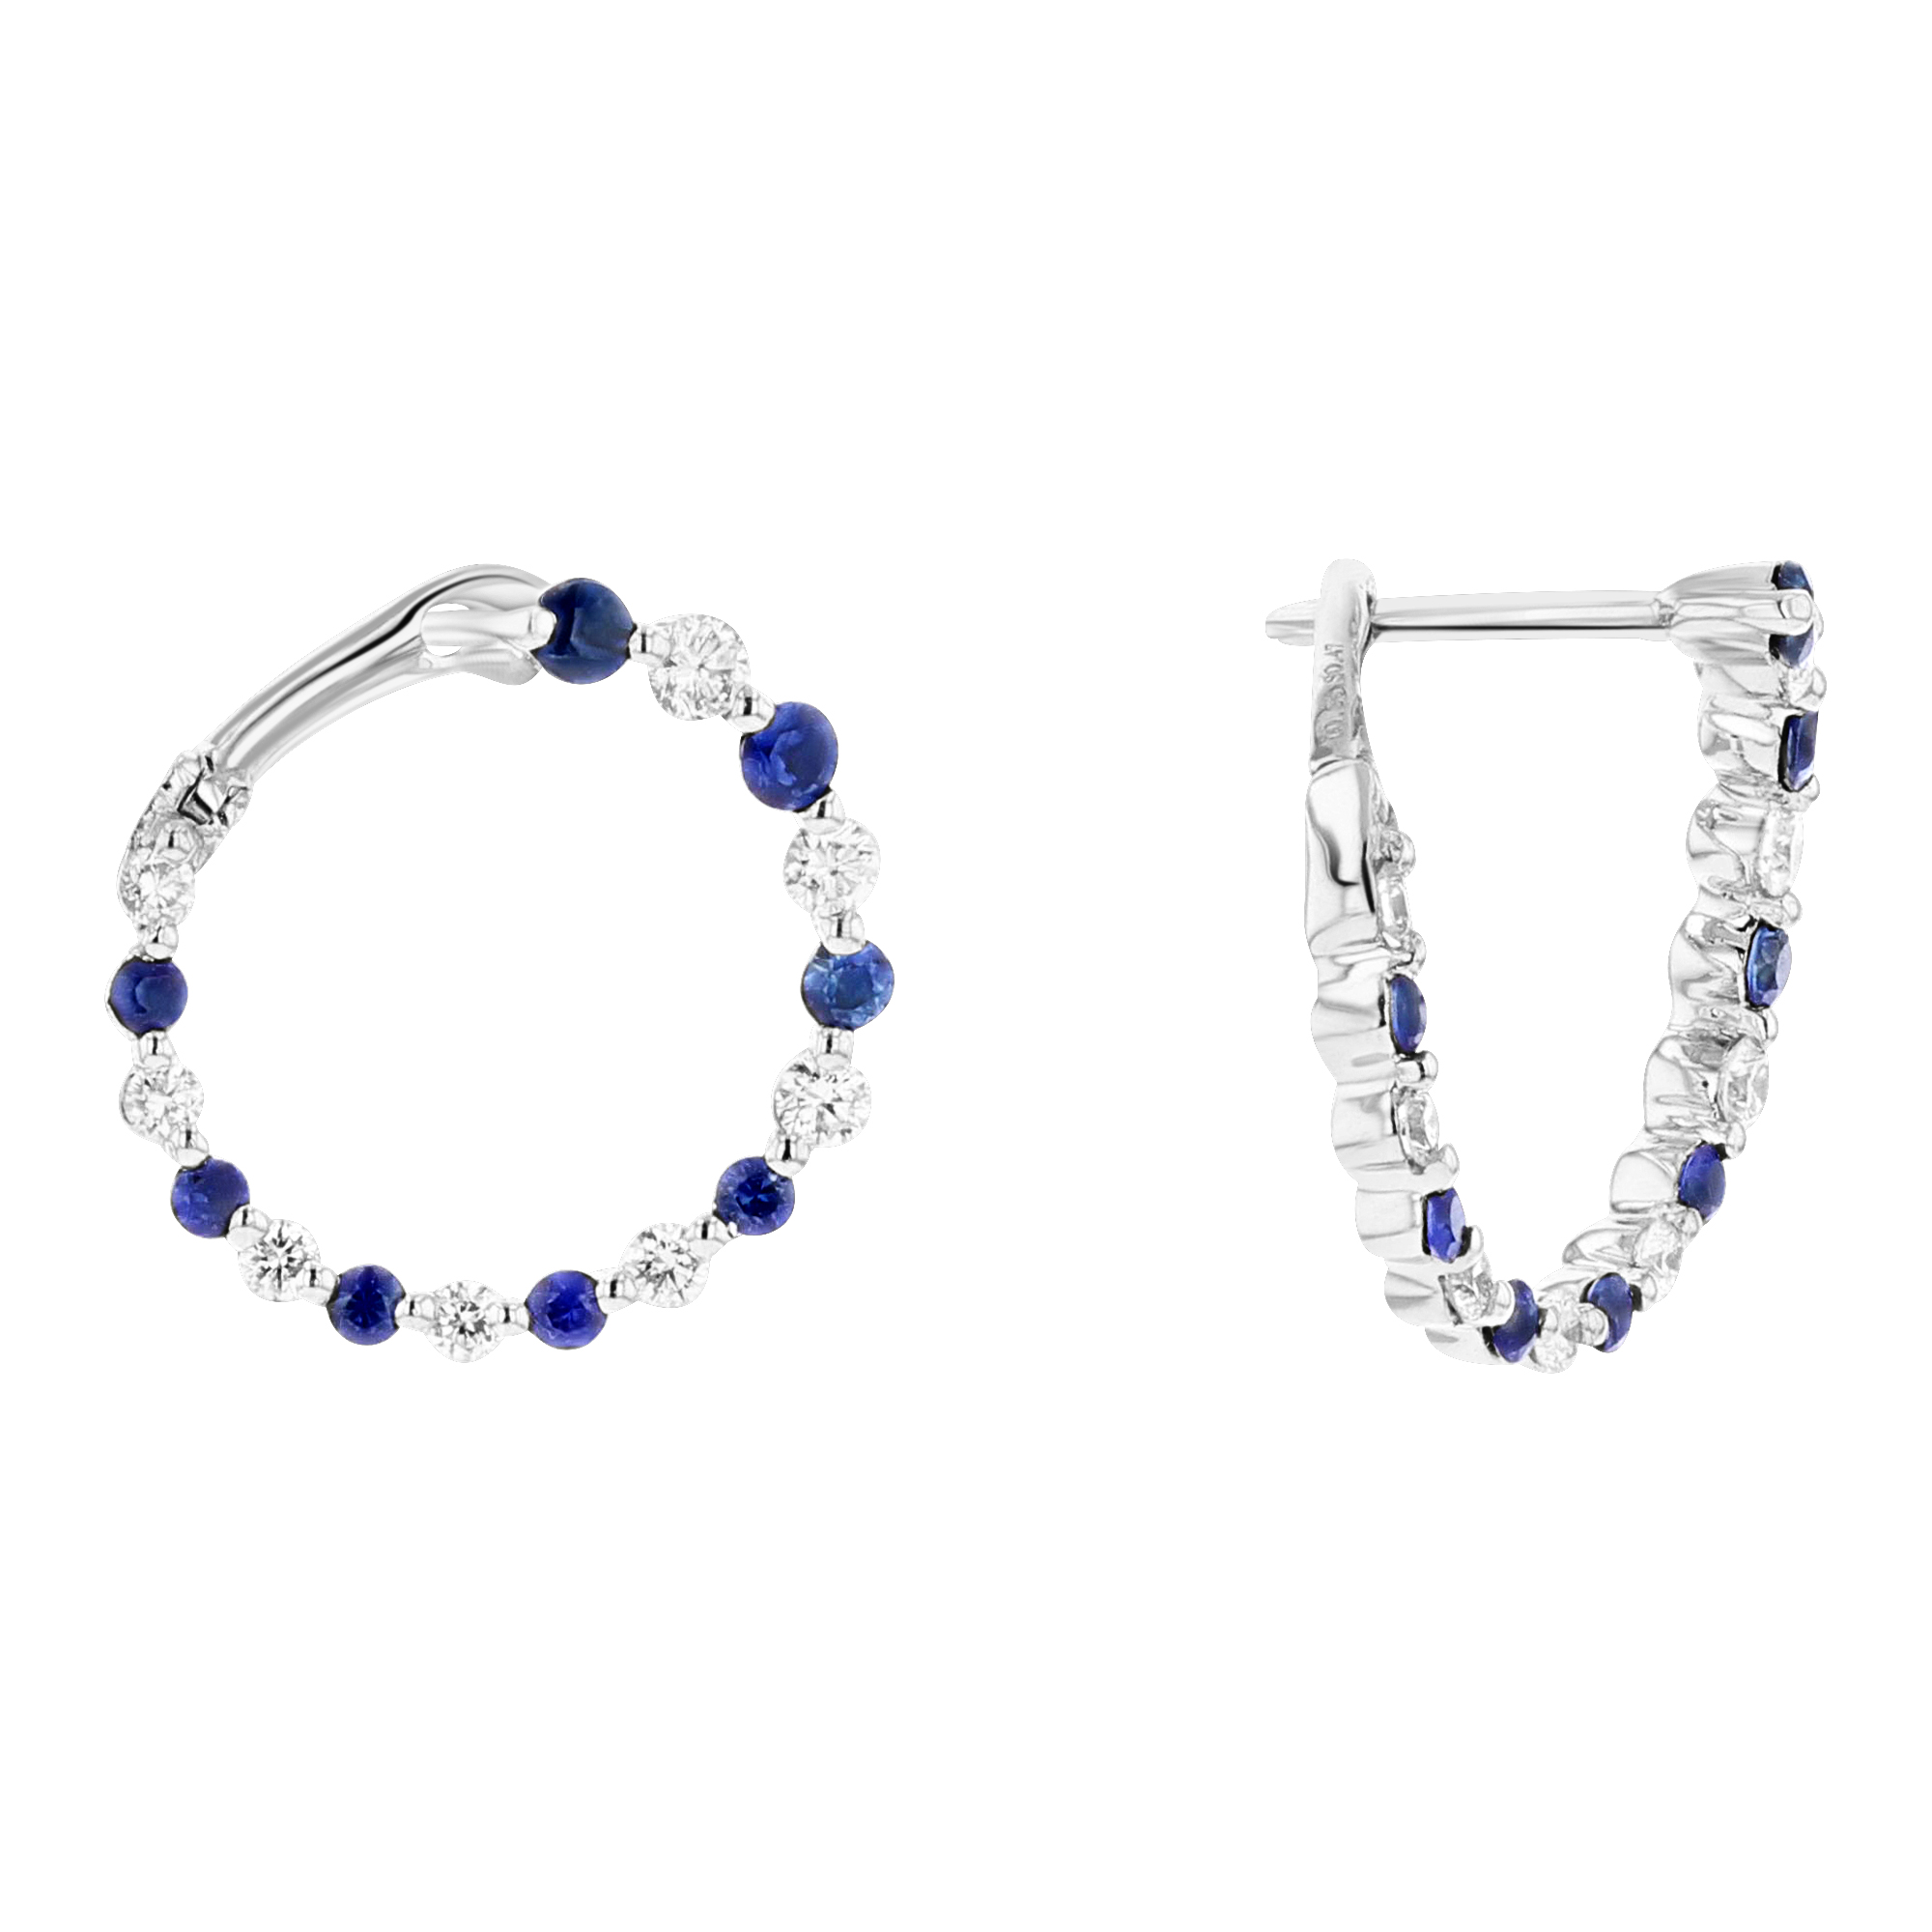 View 0.82ctw Diamond and Sapphire Fashion Earrings in 18k White Gold